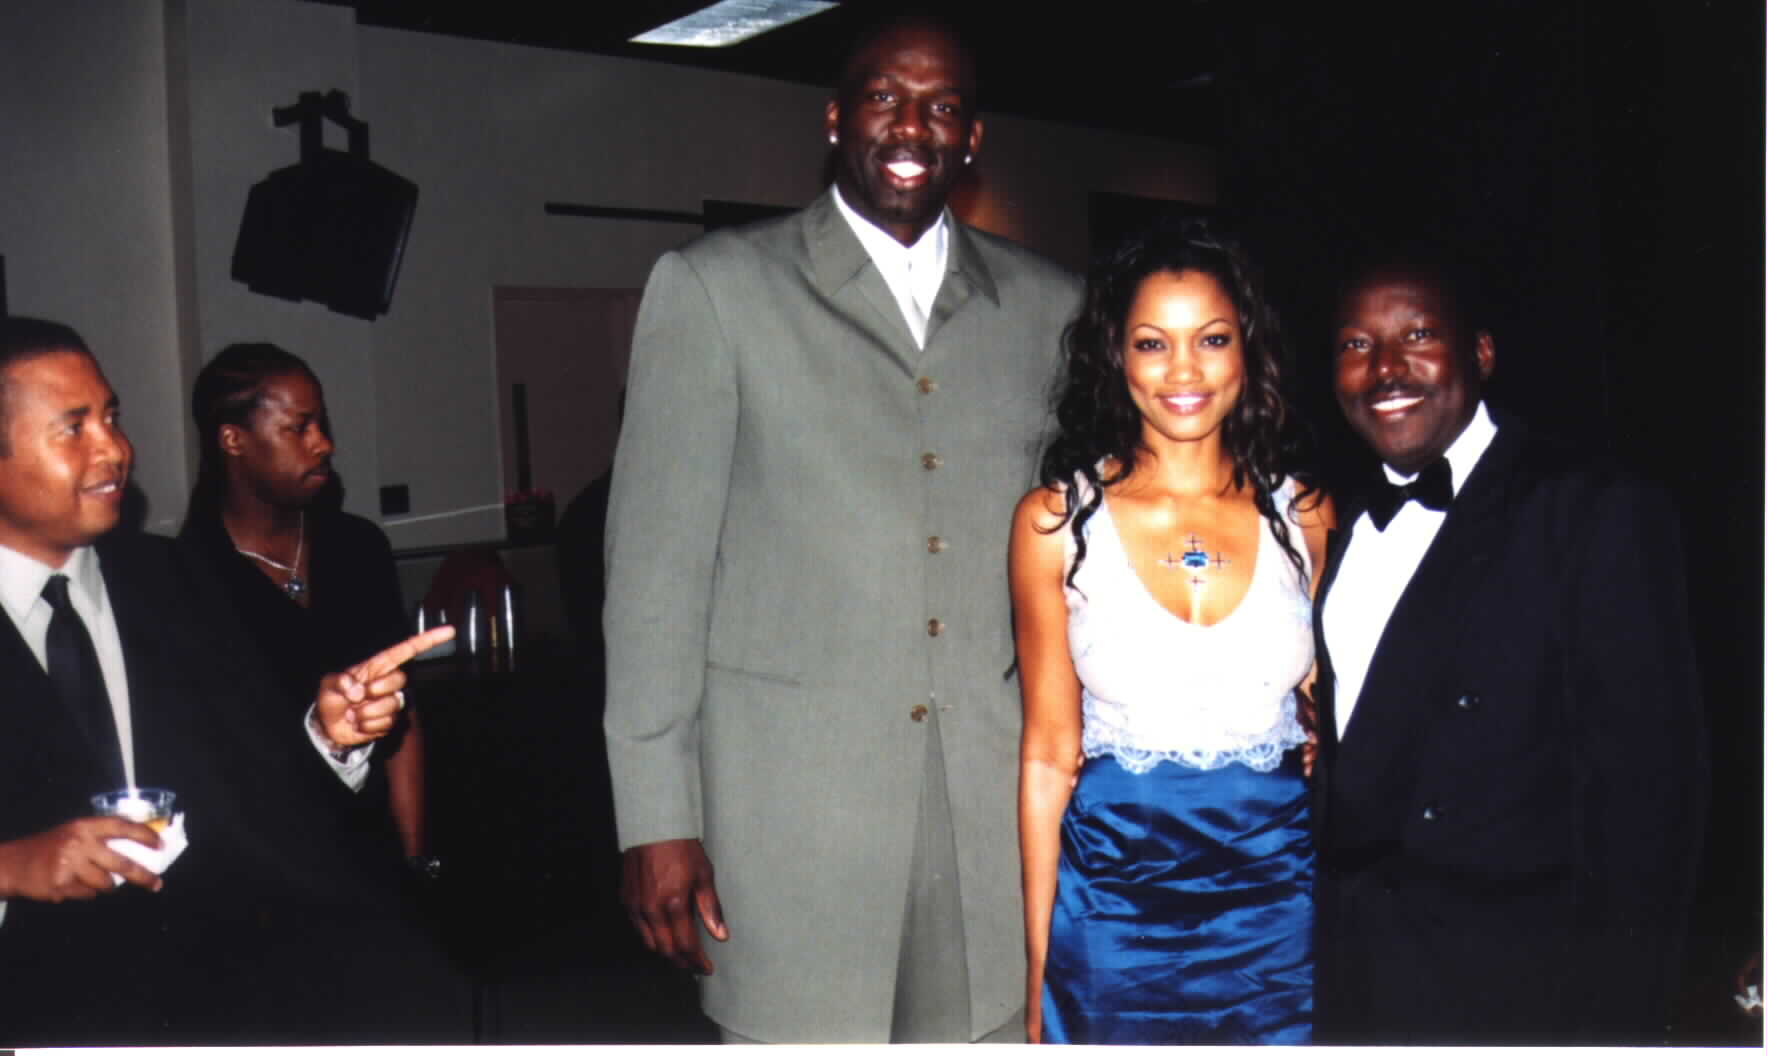 (Picture courtesy Noe Dorestant 3/31/2002: Haitian star actress Garcelle Beauvais, Olden Polynice, Noe Dorestant, WLL and fan. 
Give credit where credit is due. 